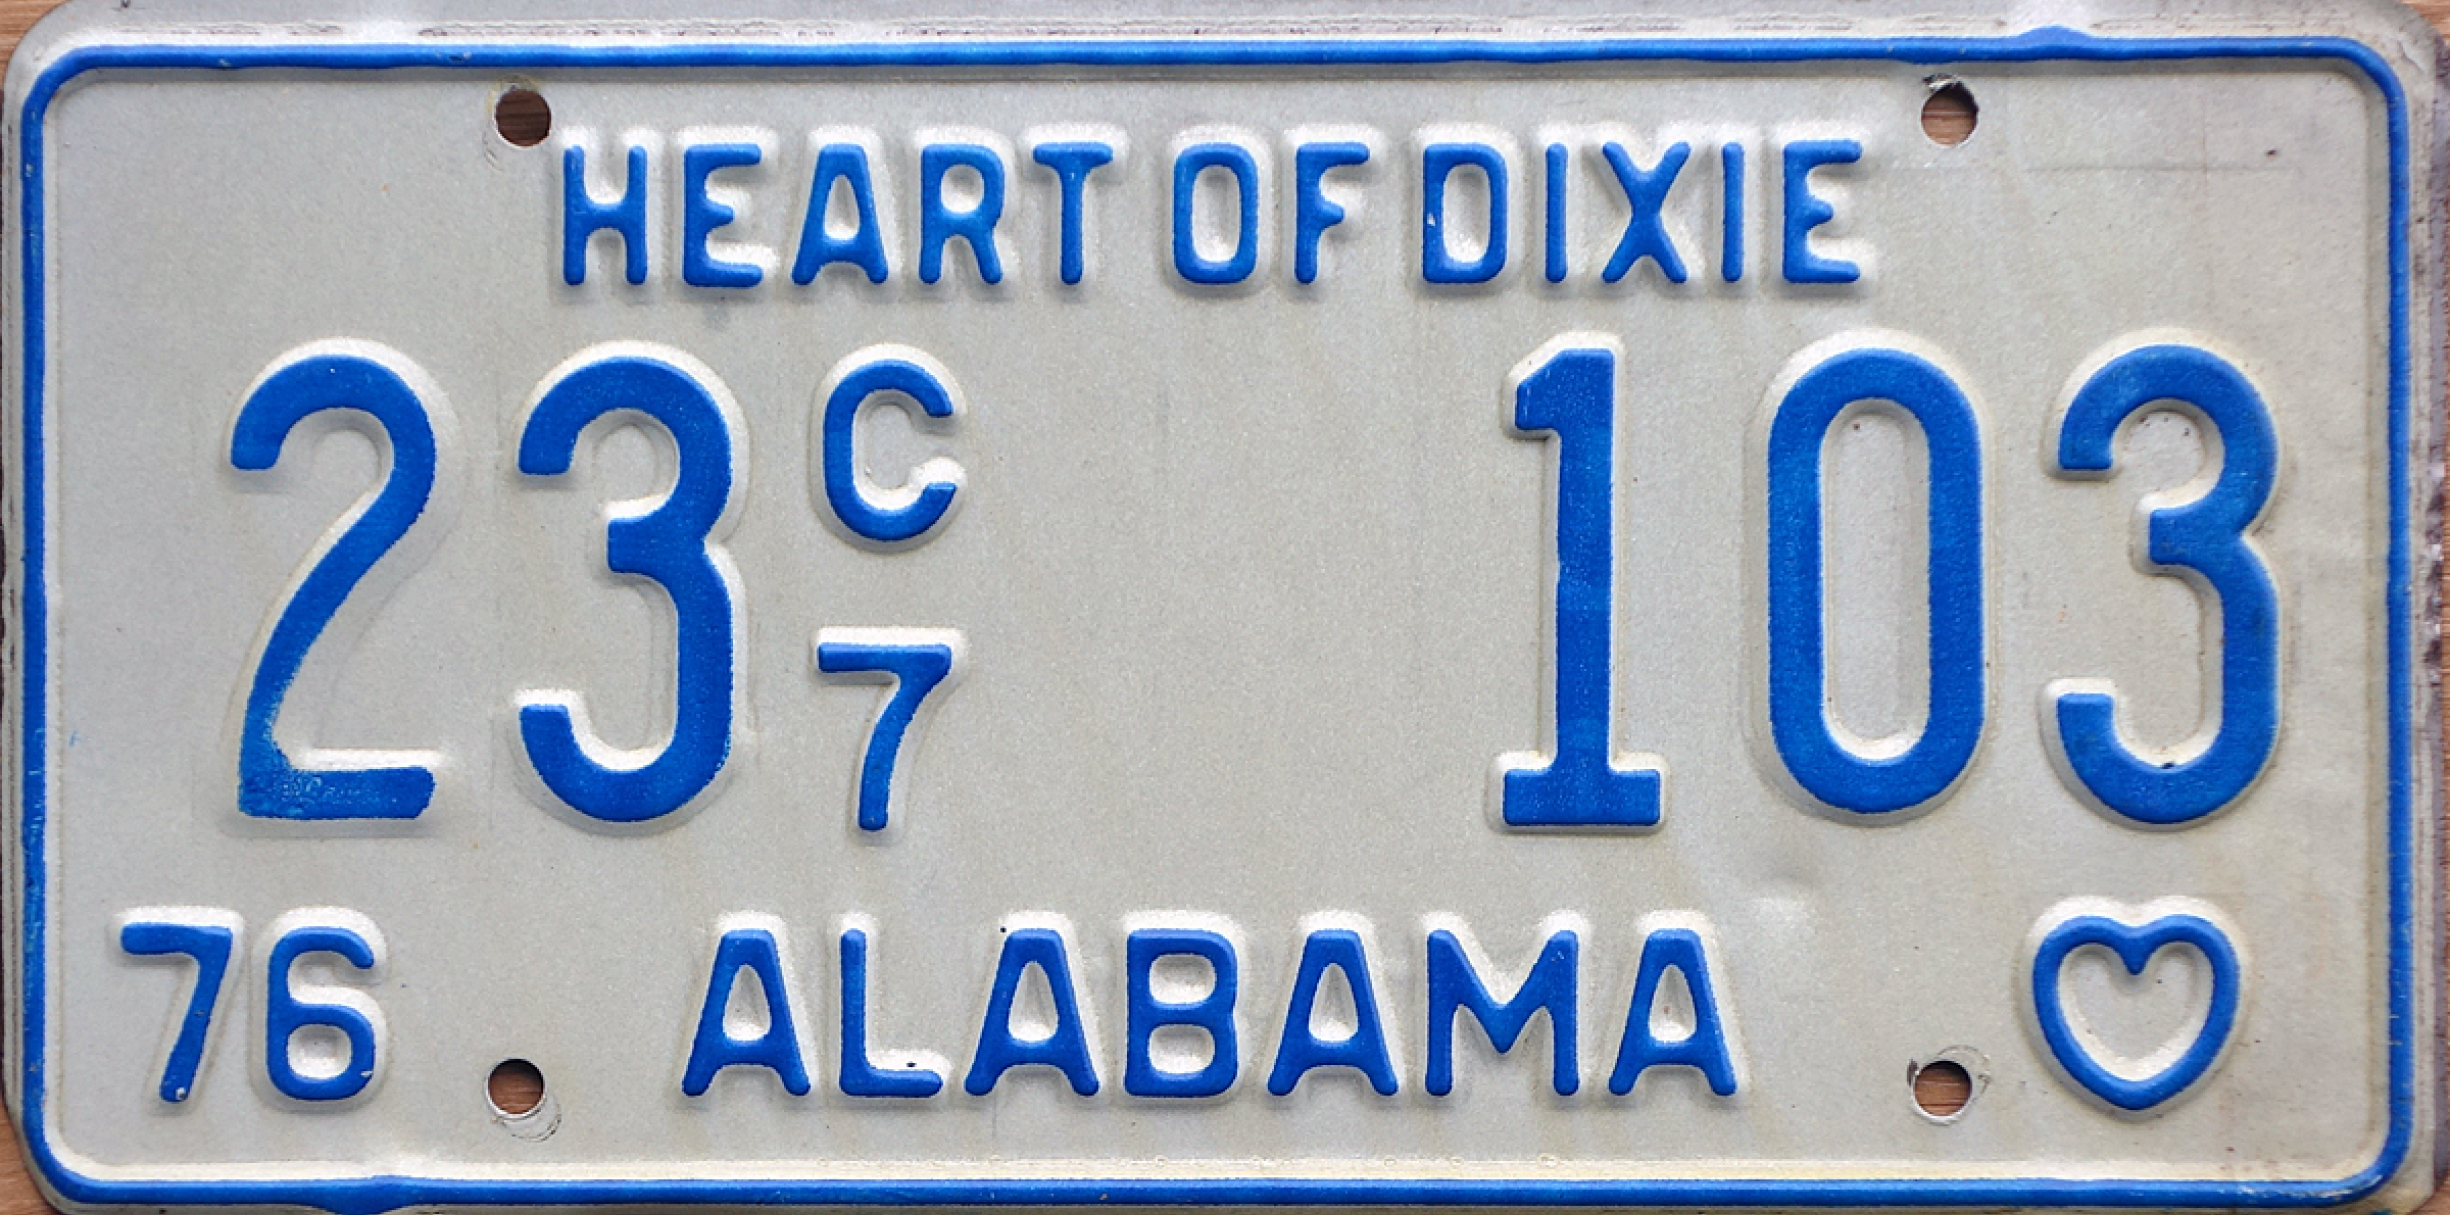 A 1976 Alabama license plate with the number 23 C7 103